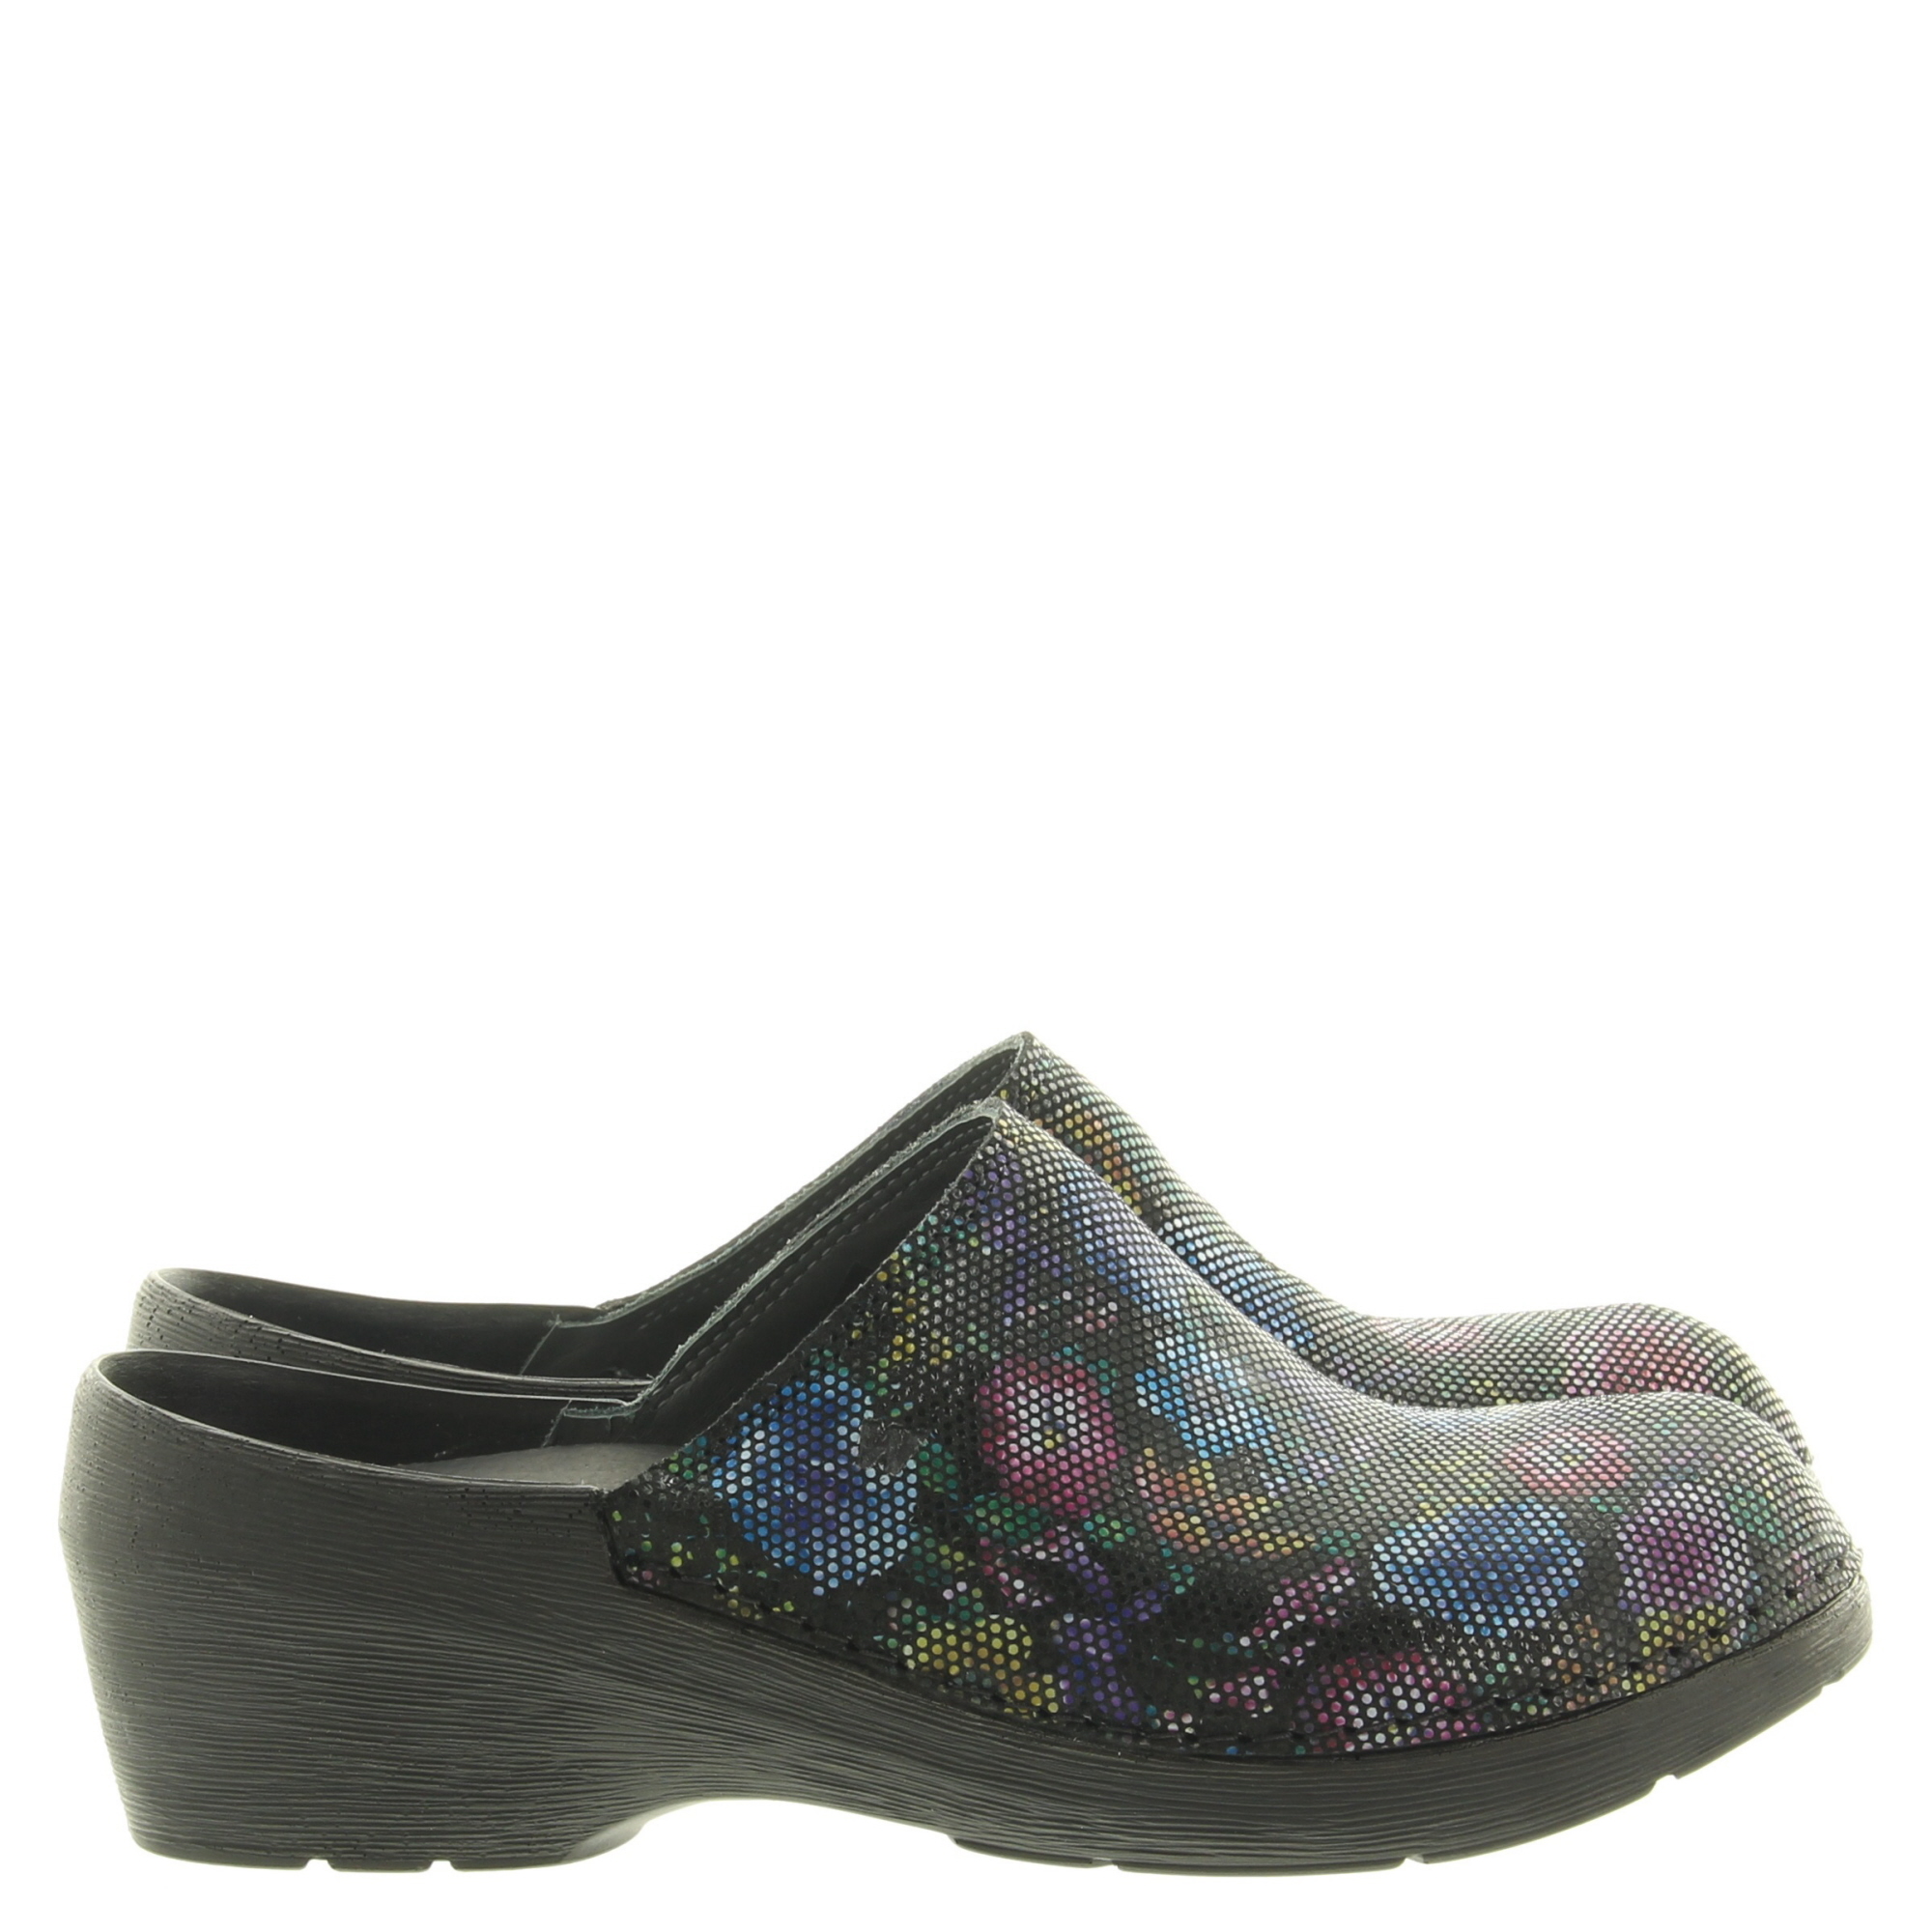 Wolky 0607545 Clog Flowerpoint 000 Black